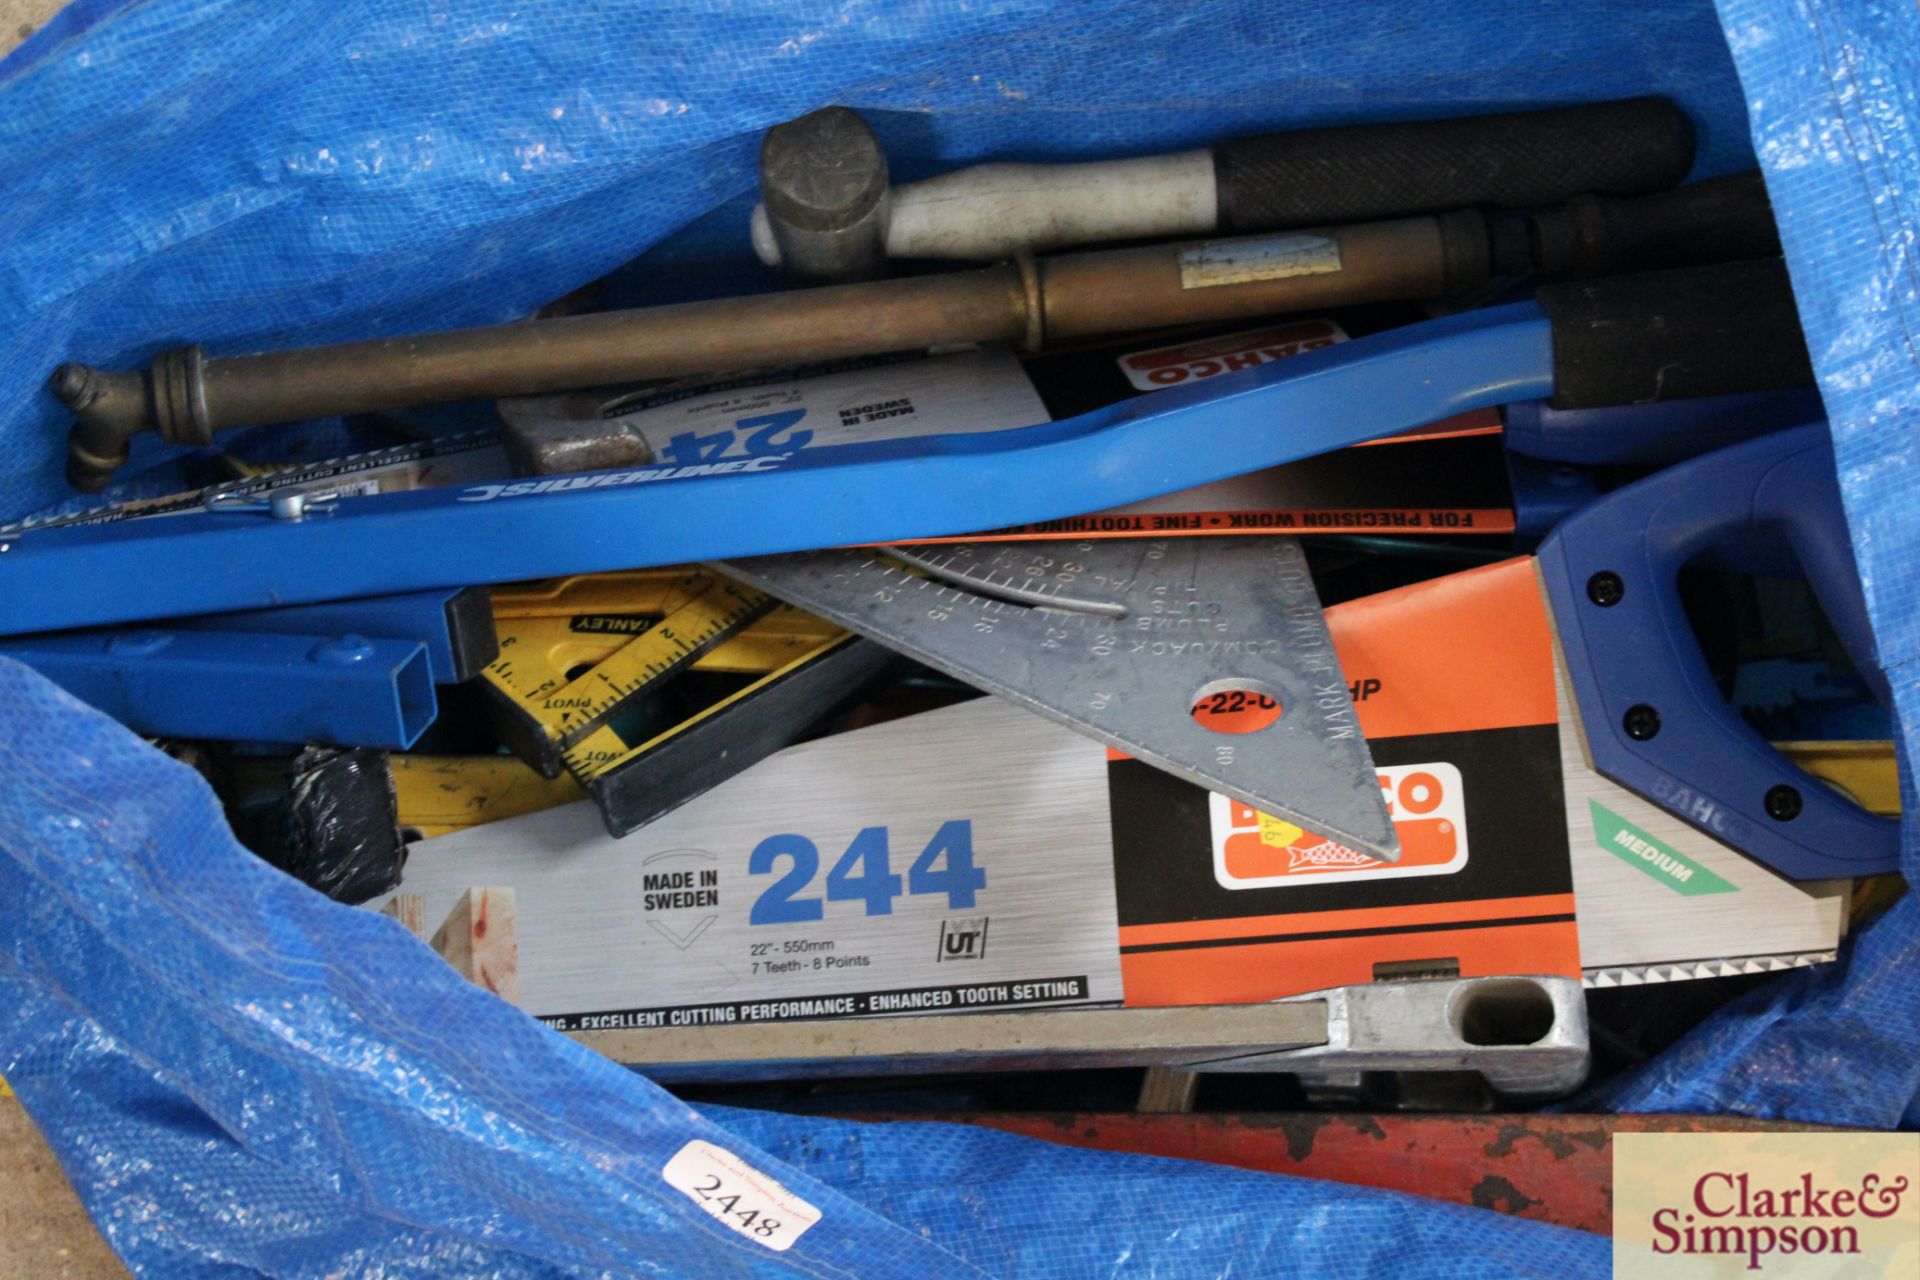 Tool bag containing various saws, squares etc. - Image 3 of 3